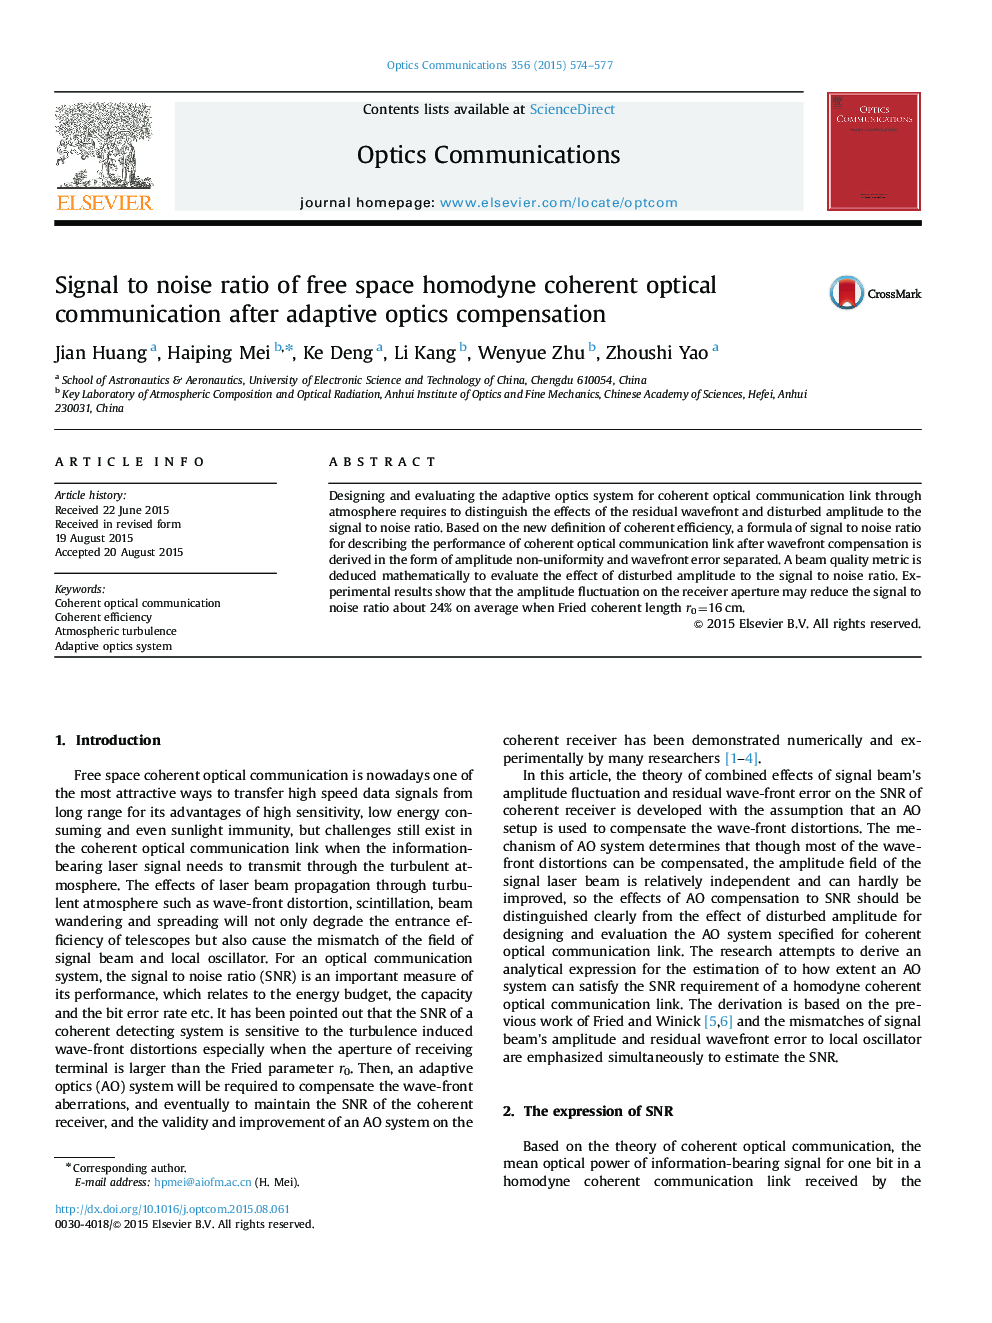 Signal to noise ratio of free space homodyne coherent optical communication after adaptive optics compensation